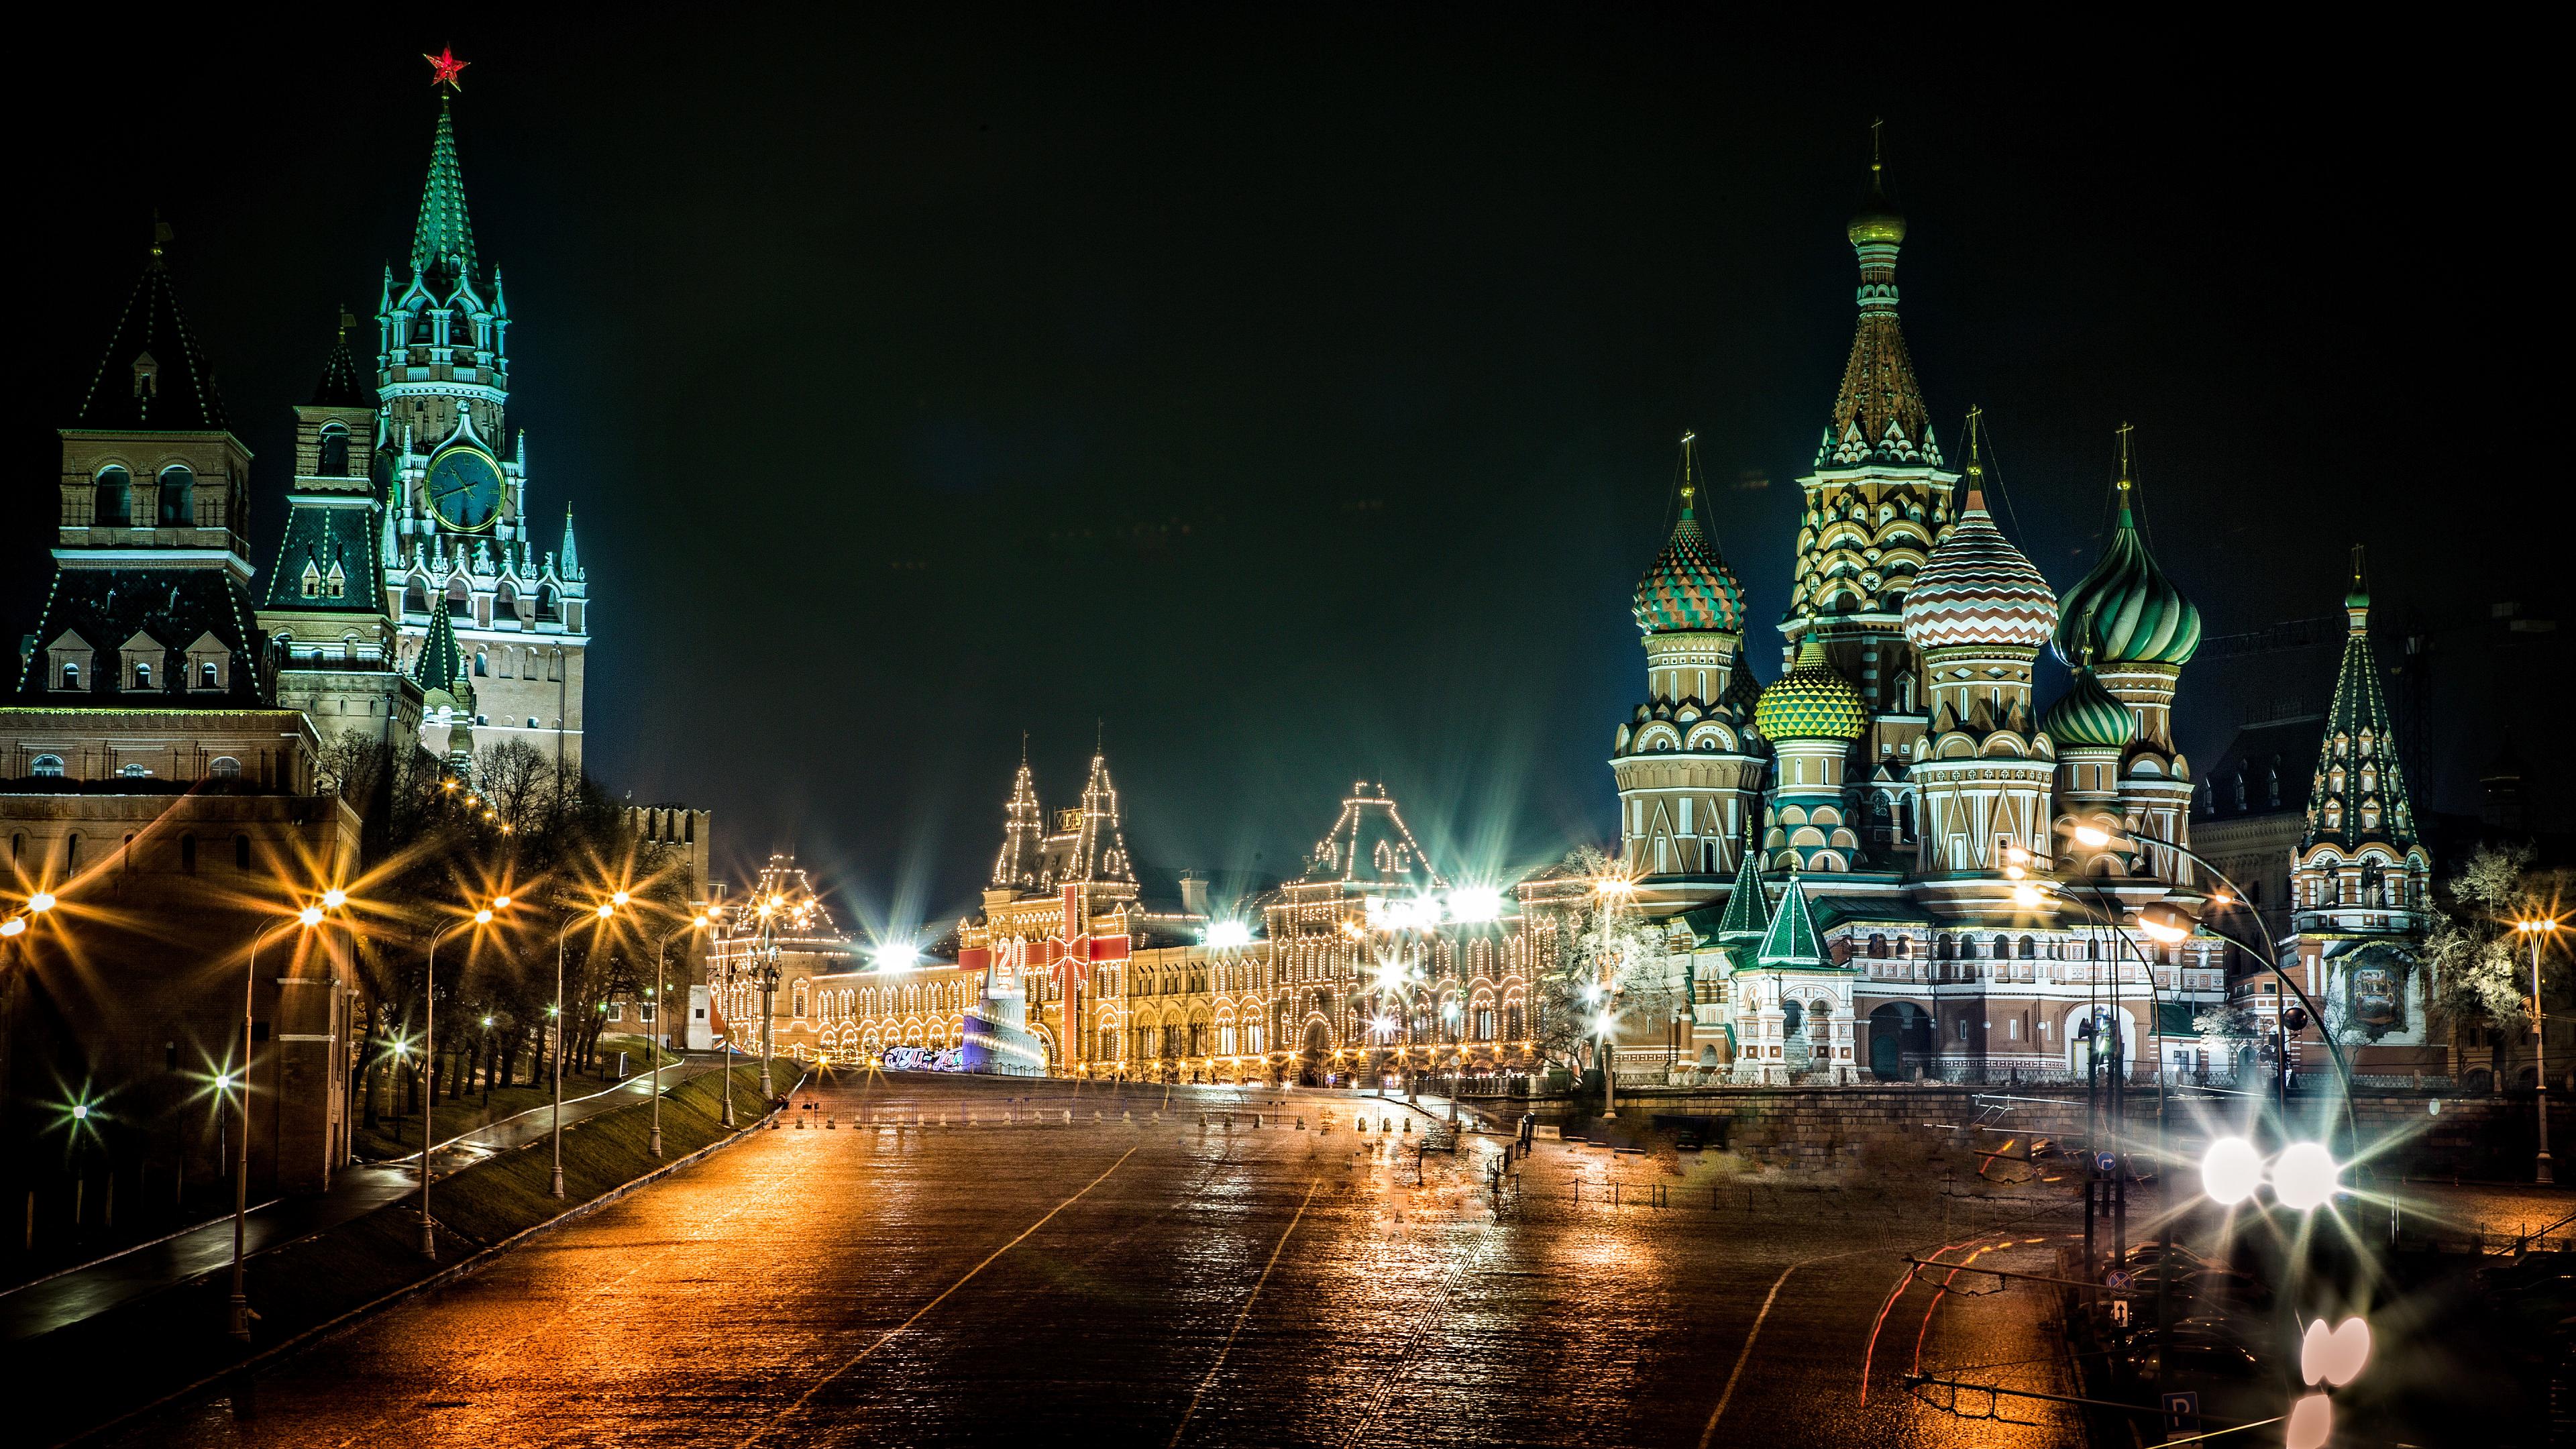 Wallpapers Moscow kremlin St Basils Cathedral on the desktop